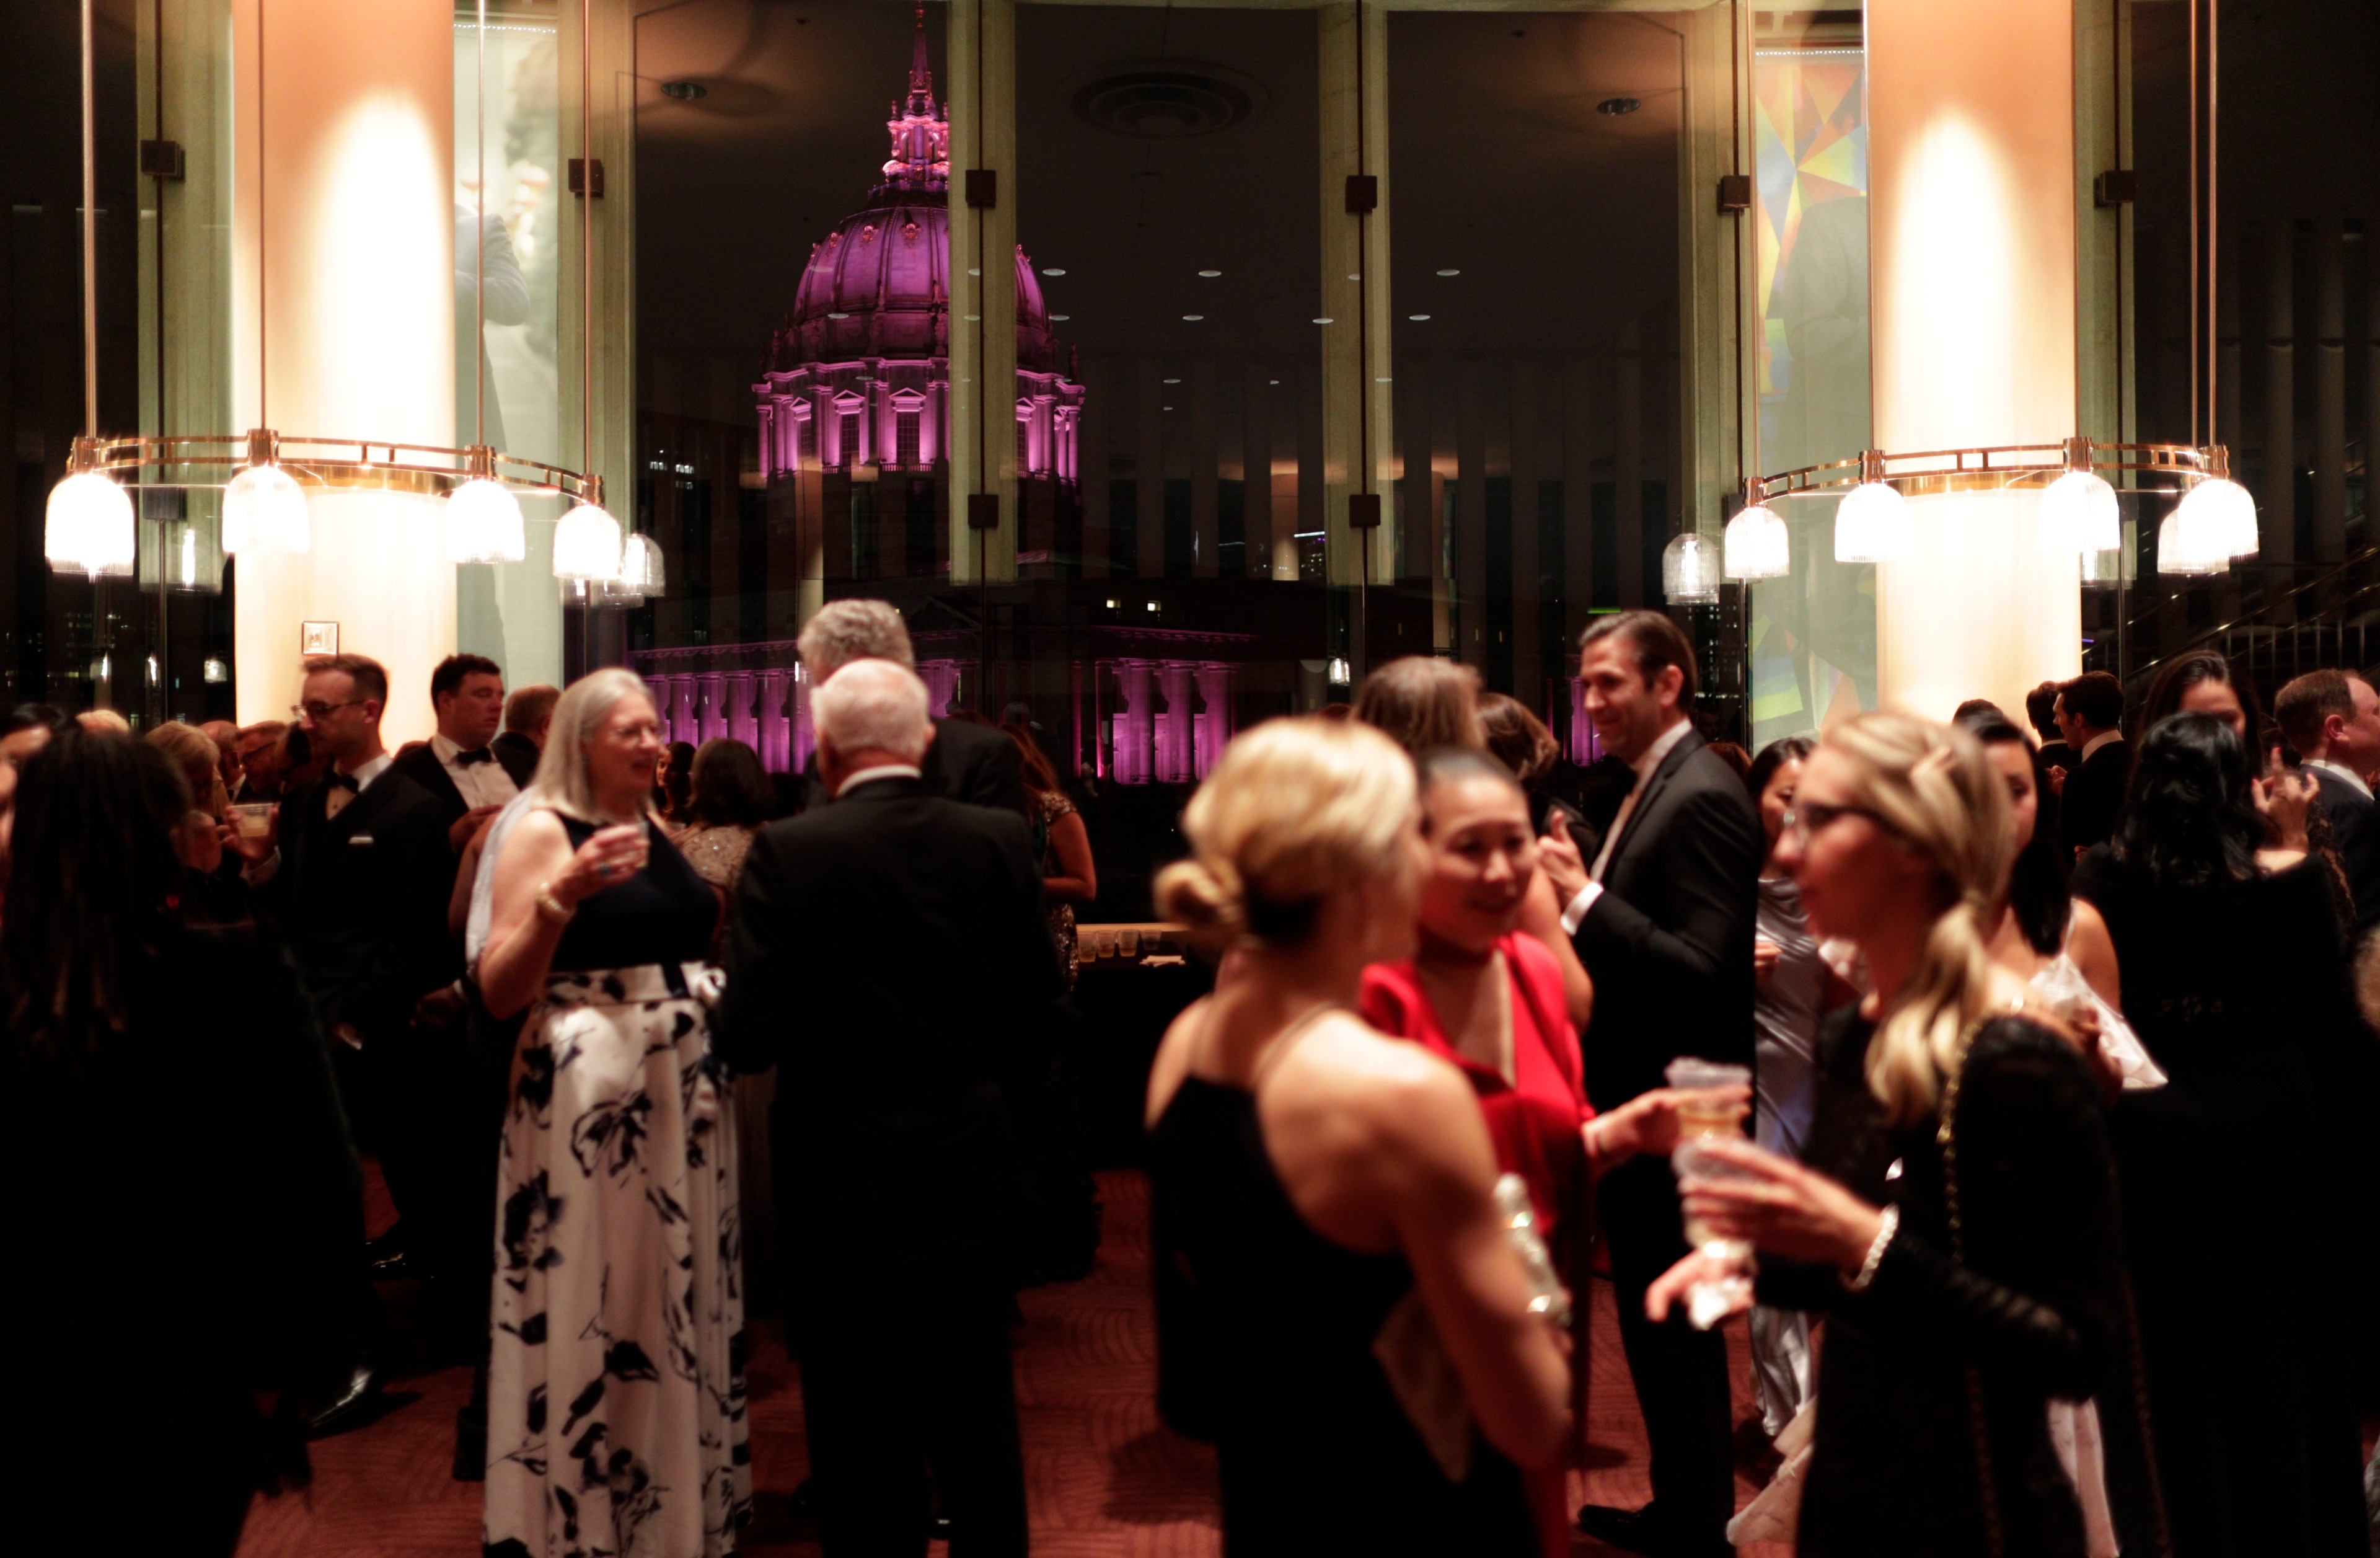 Dozens of people stand around talking during a cocktail hour in a lowly lit lounge space with a view of San Francisco City Hall out the window lit up in purple light.